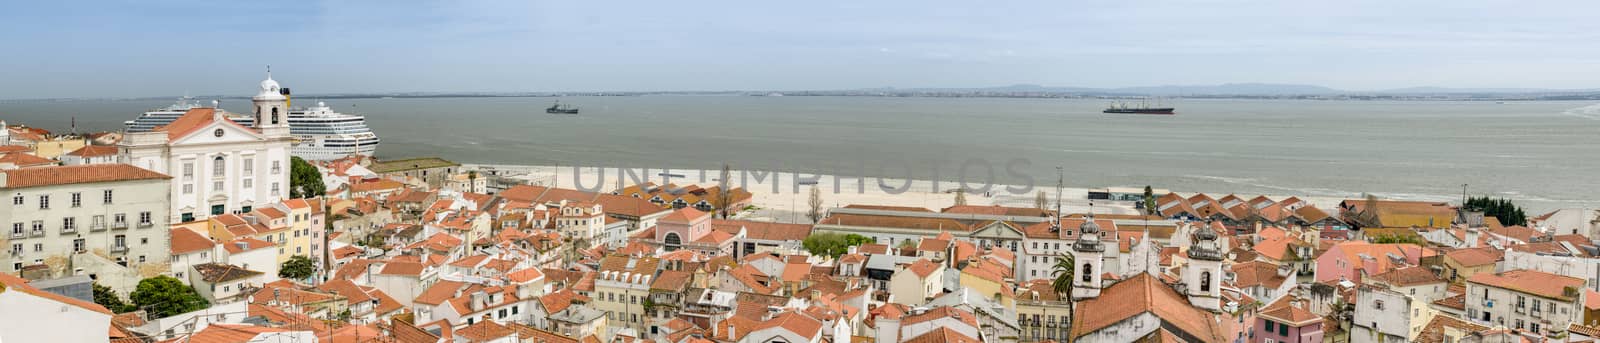 Tagus river panorama, view from Alfama, Lisbon, Portugal.